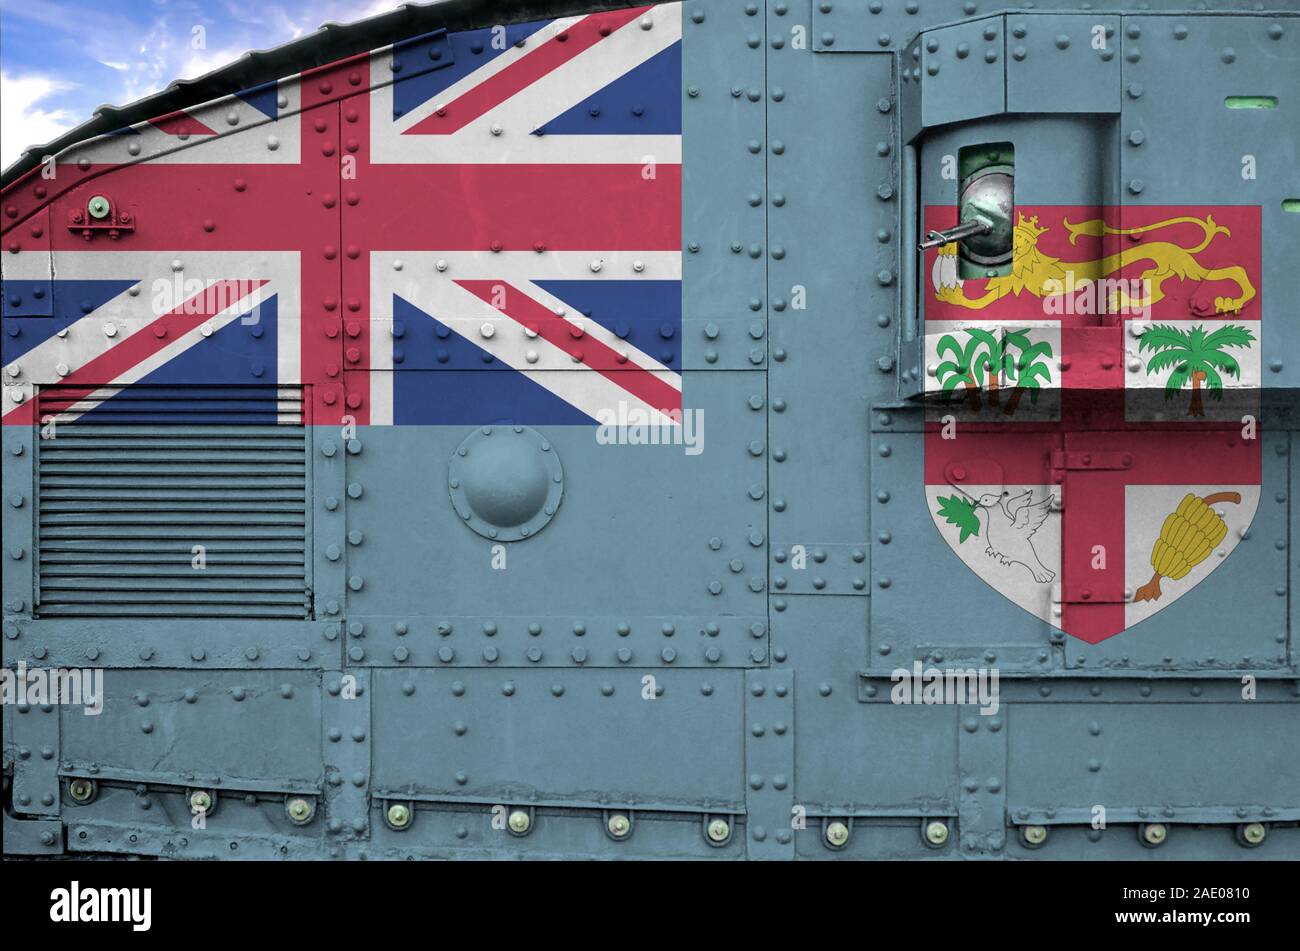 Fiji flag depicted on side part of military armored tank close up. Army forces conceptual background Stock Photo